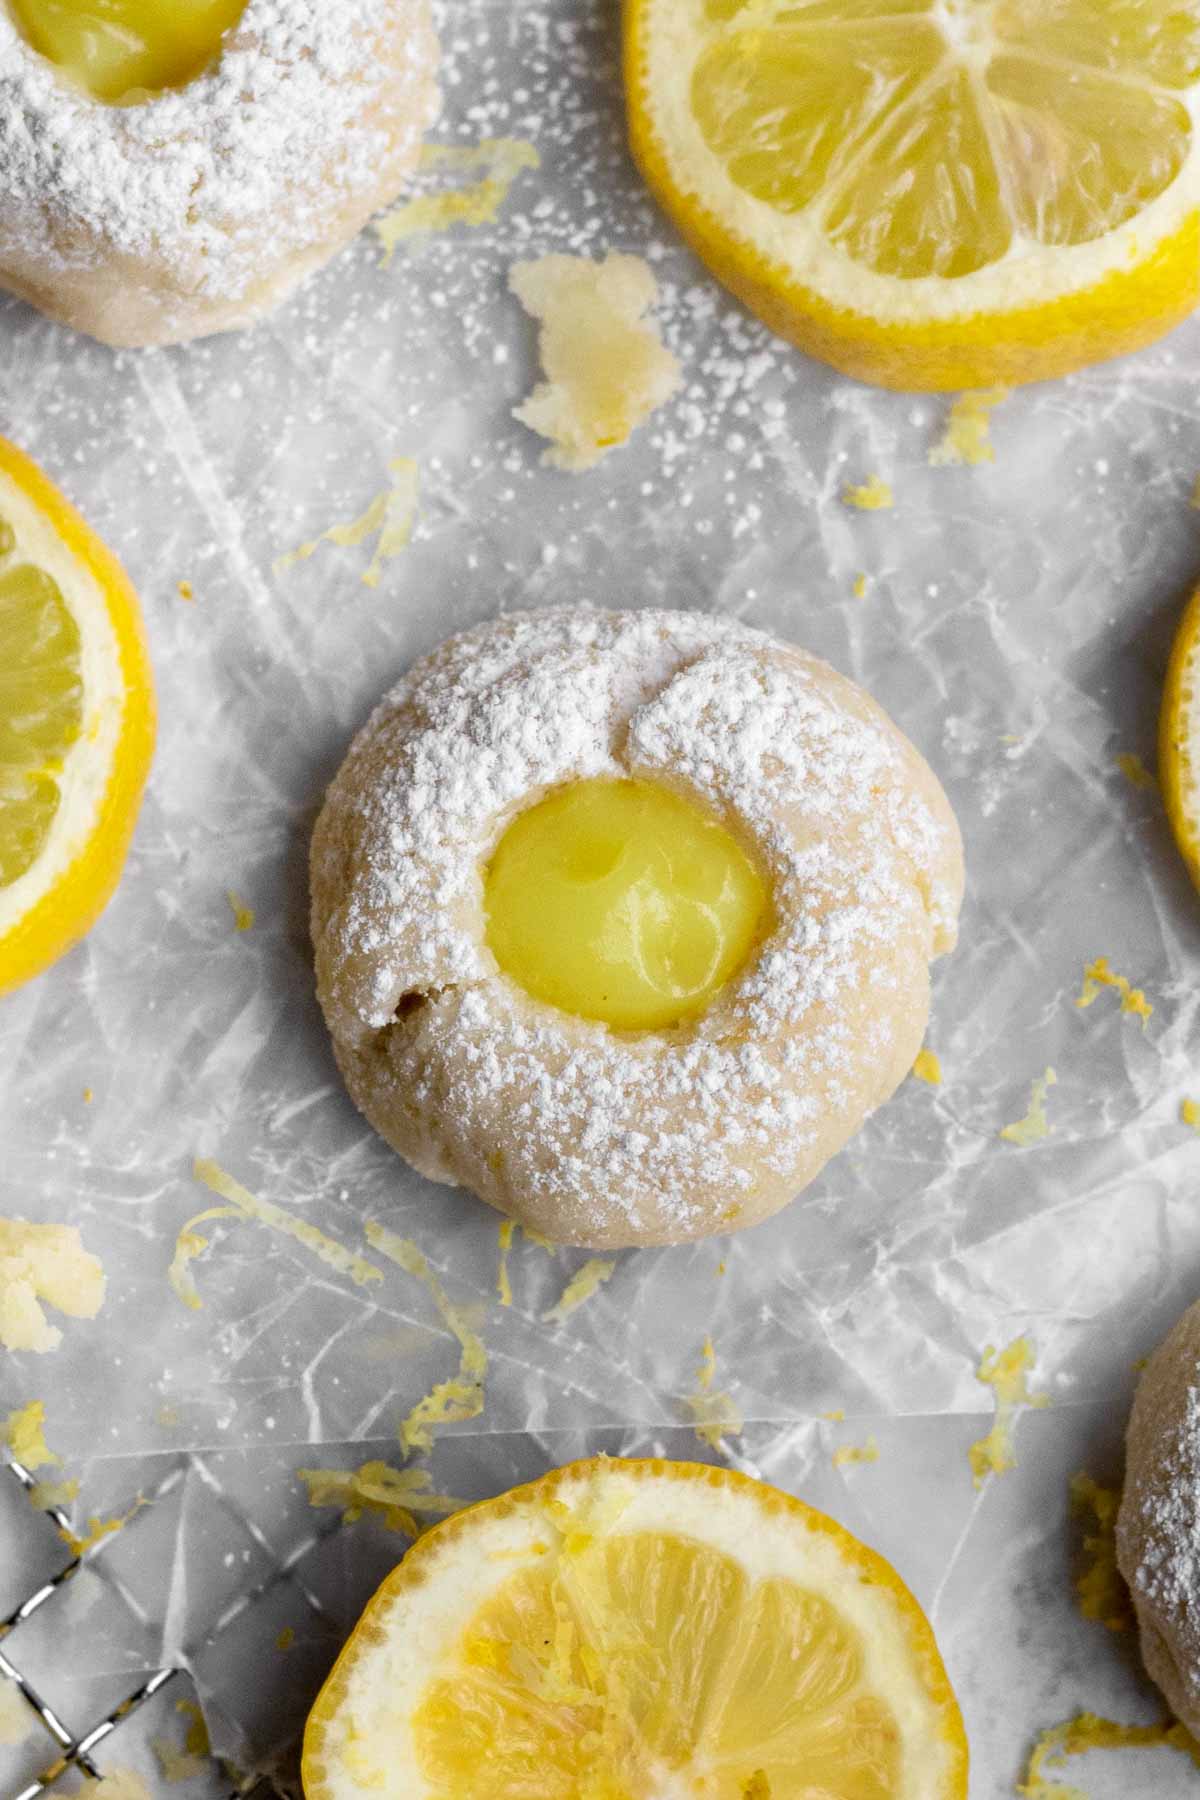 A closer look a the eggless lemon curd center of the cookie.